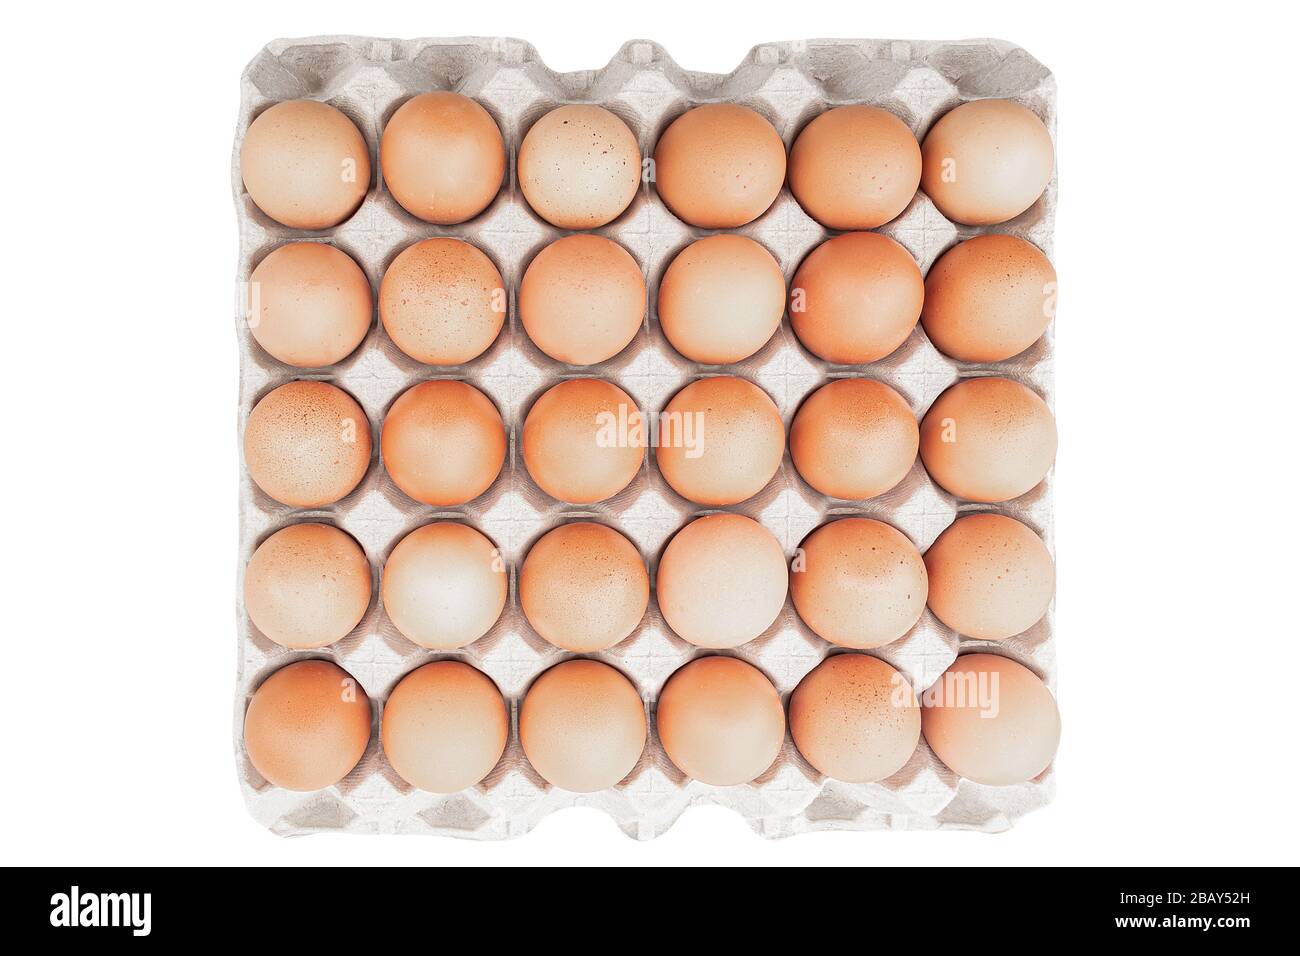 Organic farm eggs in an egg box isolated on white background. Chickens eggs from ecologically clean areas. Top view. Stock Photo